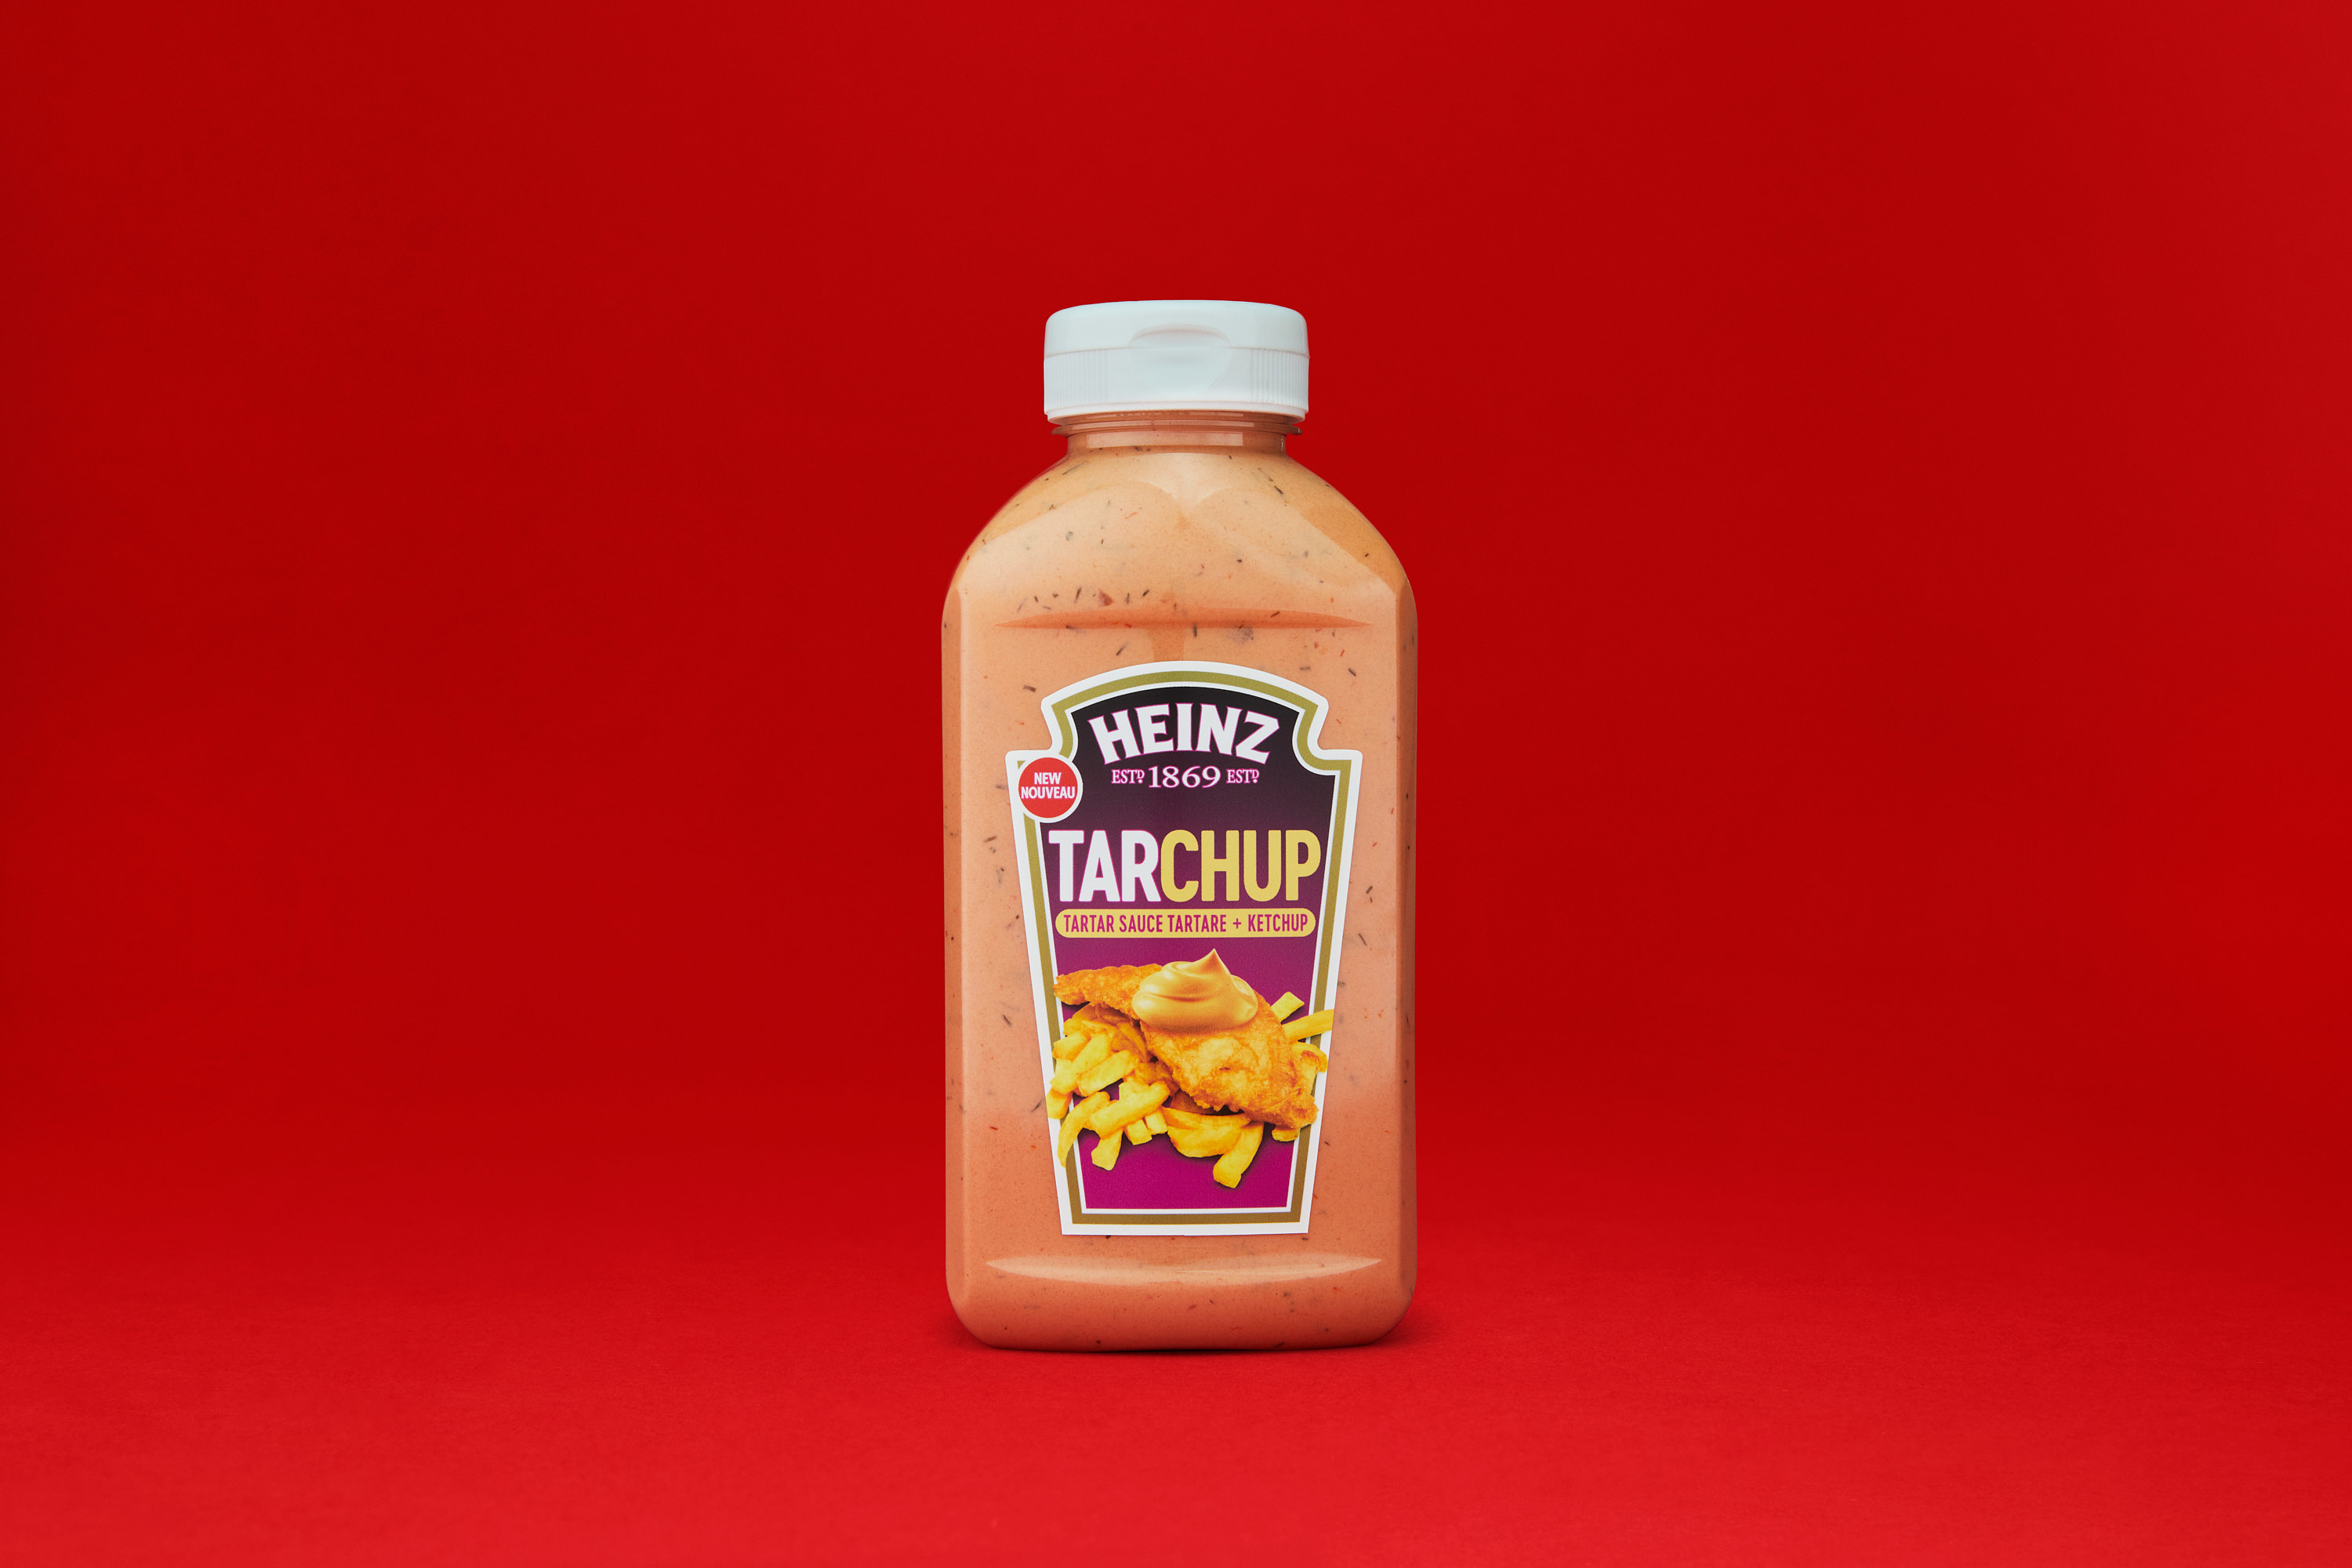 A bottle of Tarchup sauce on a red backdrop.